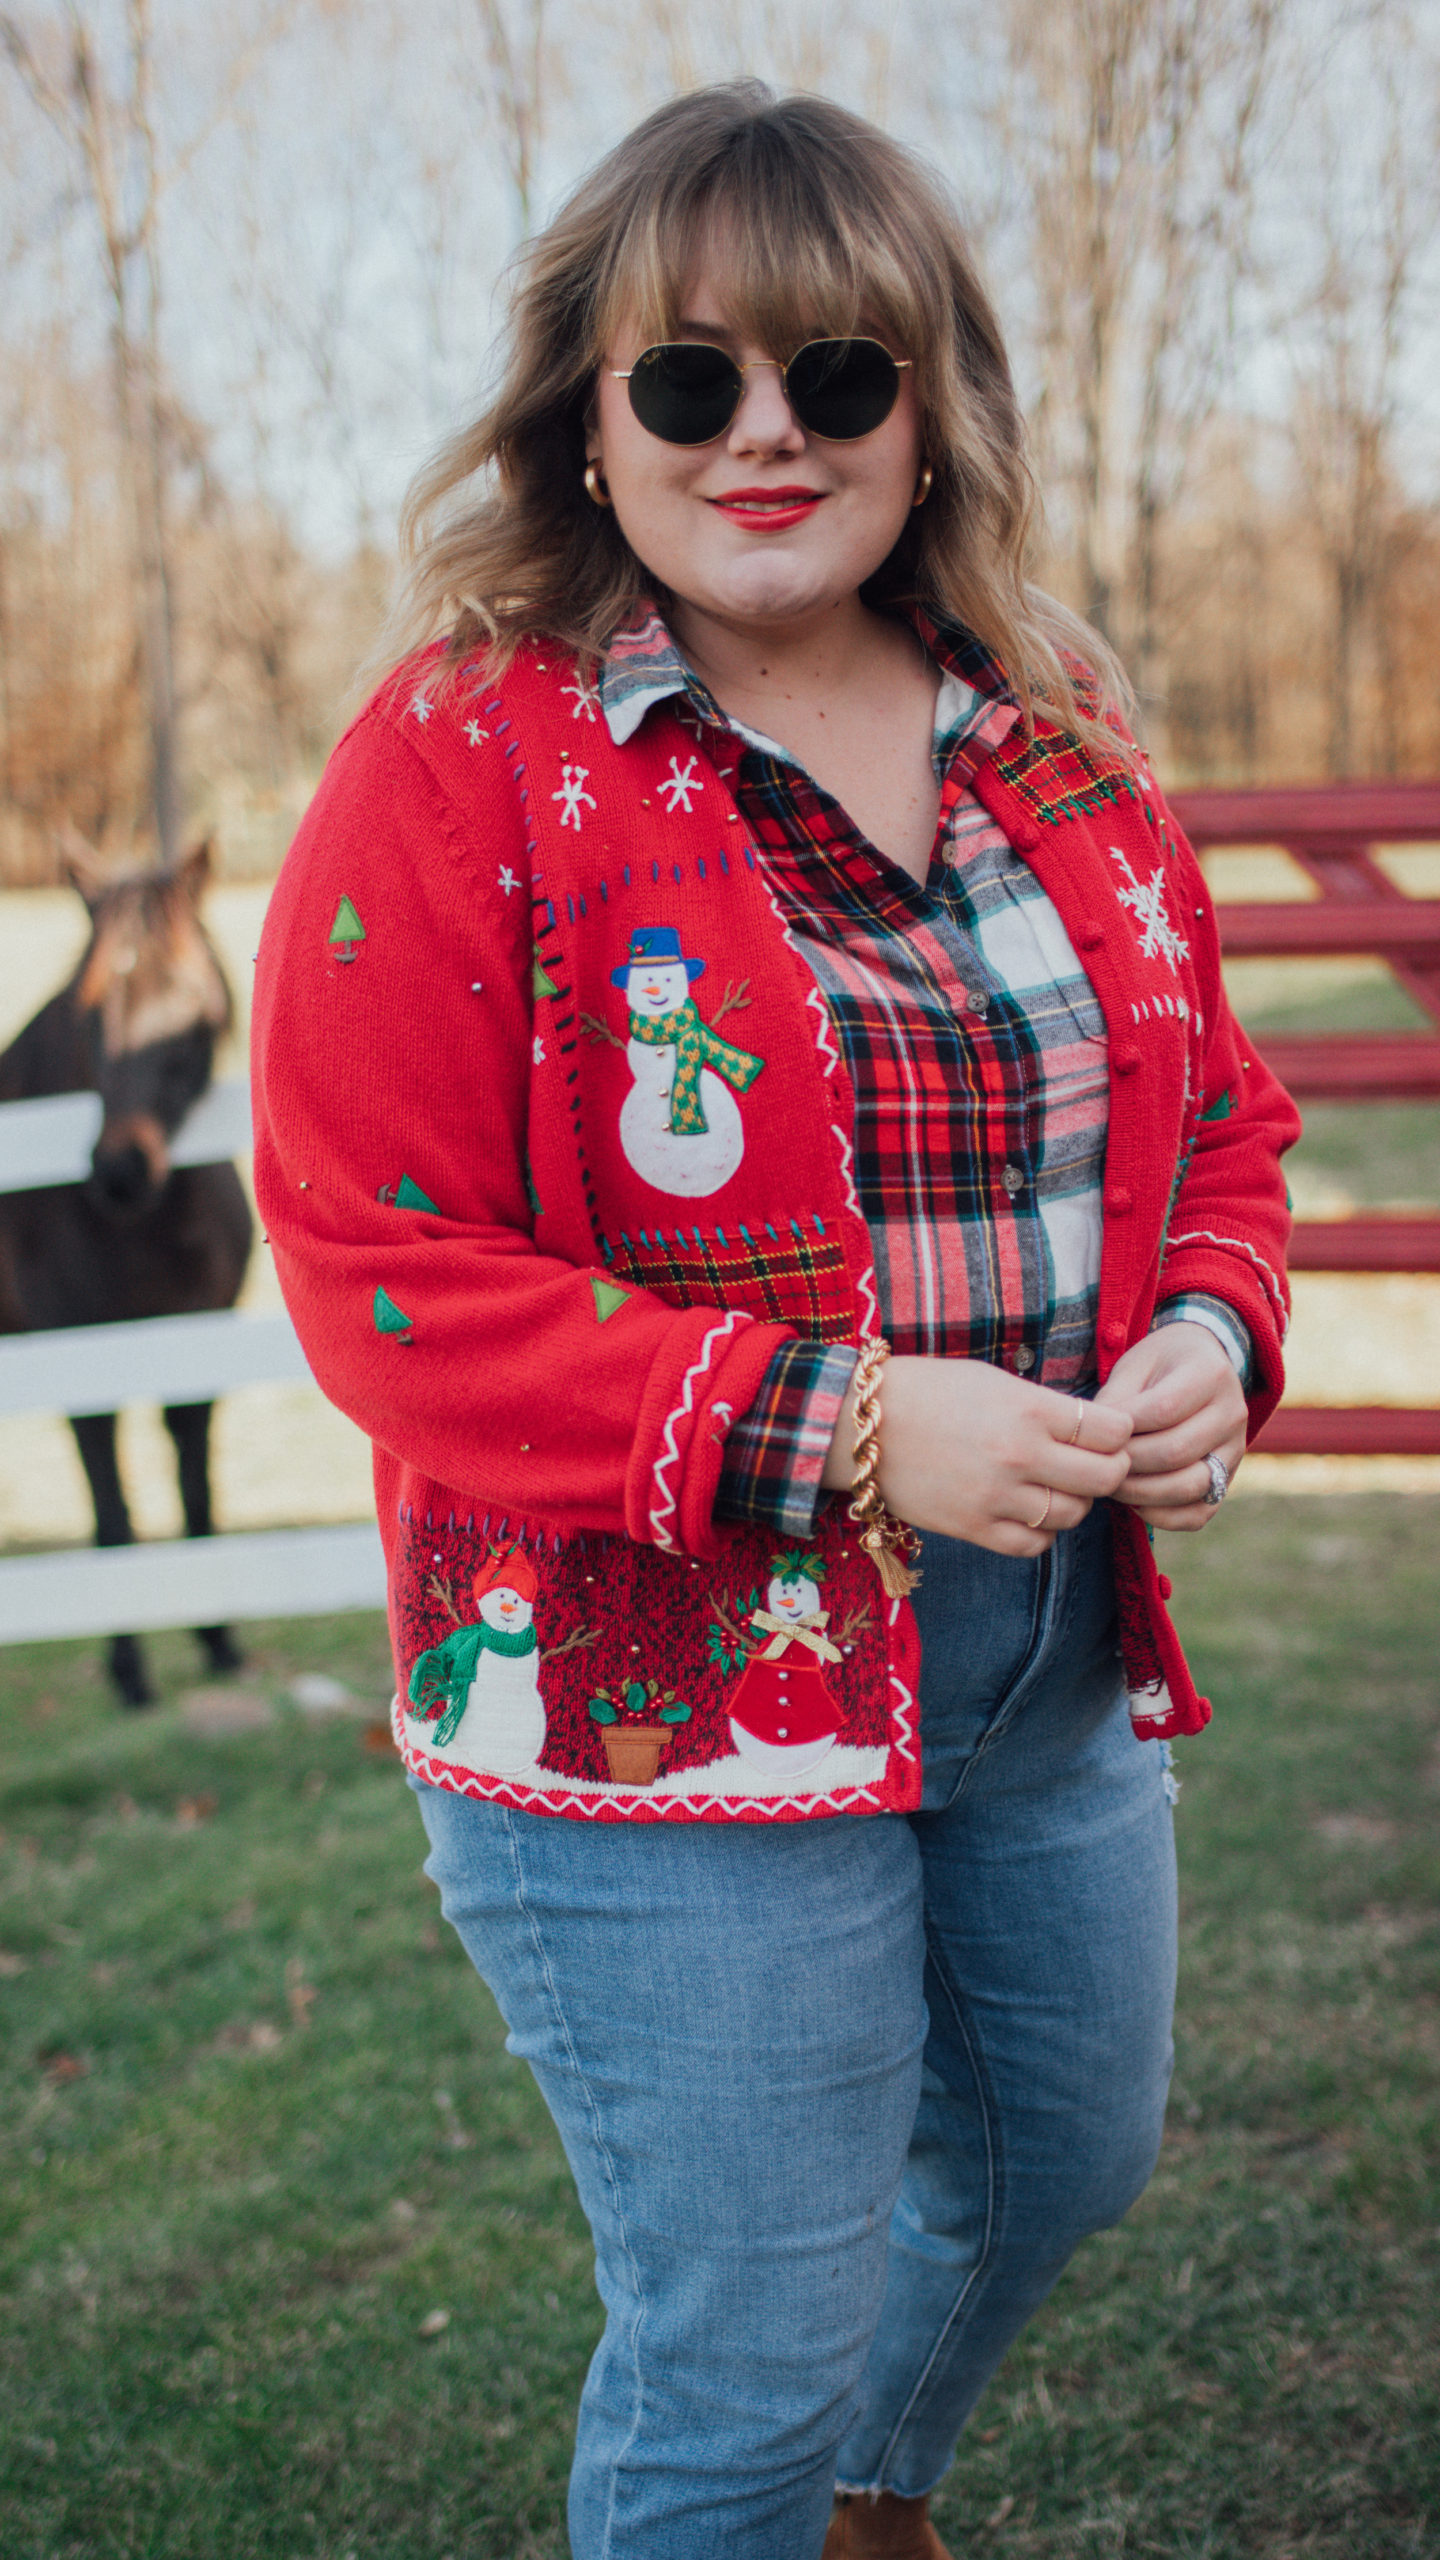 Merry Christmas 2021! Styling a vintage Christmas sweater that looks just like one I had as a kid on the blog today! 